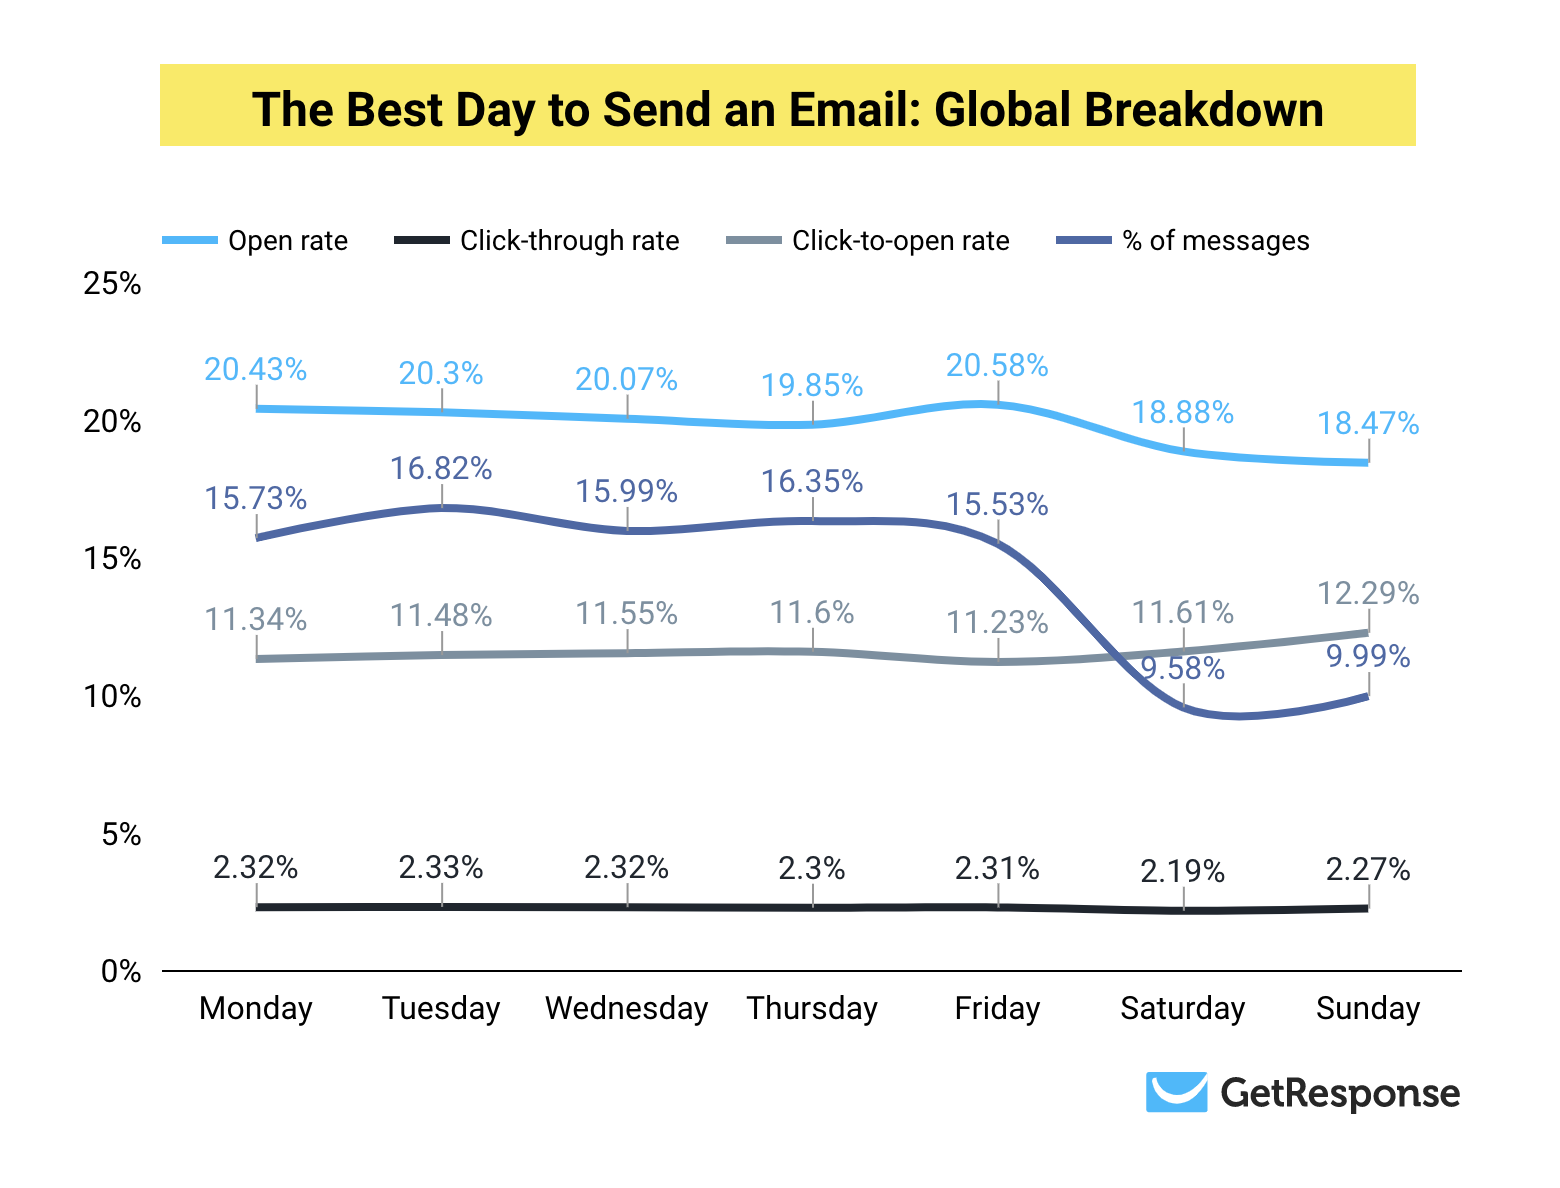 getresponse study on best day to send email